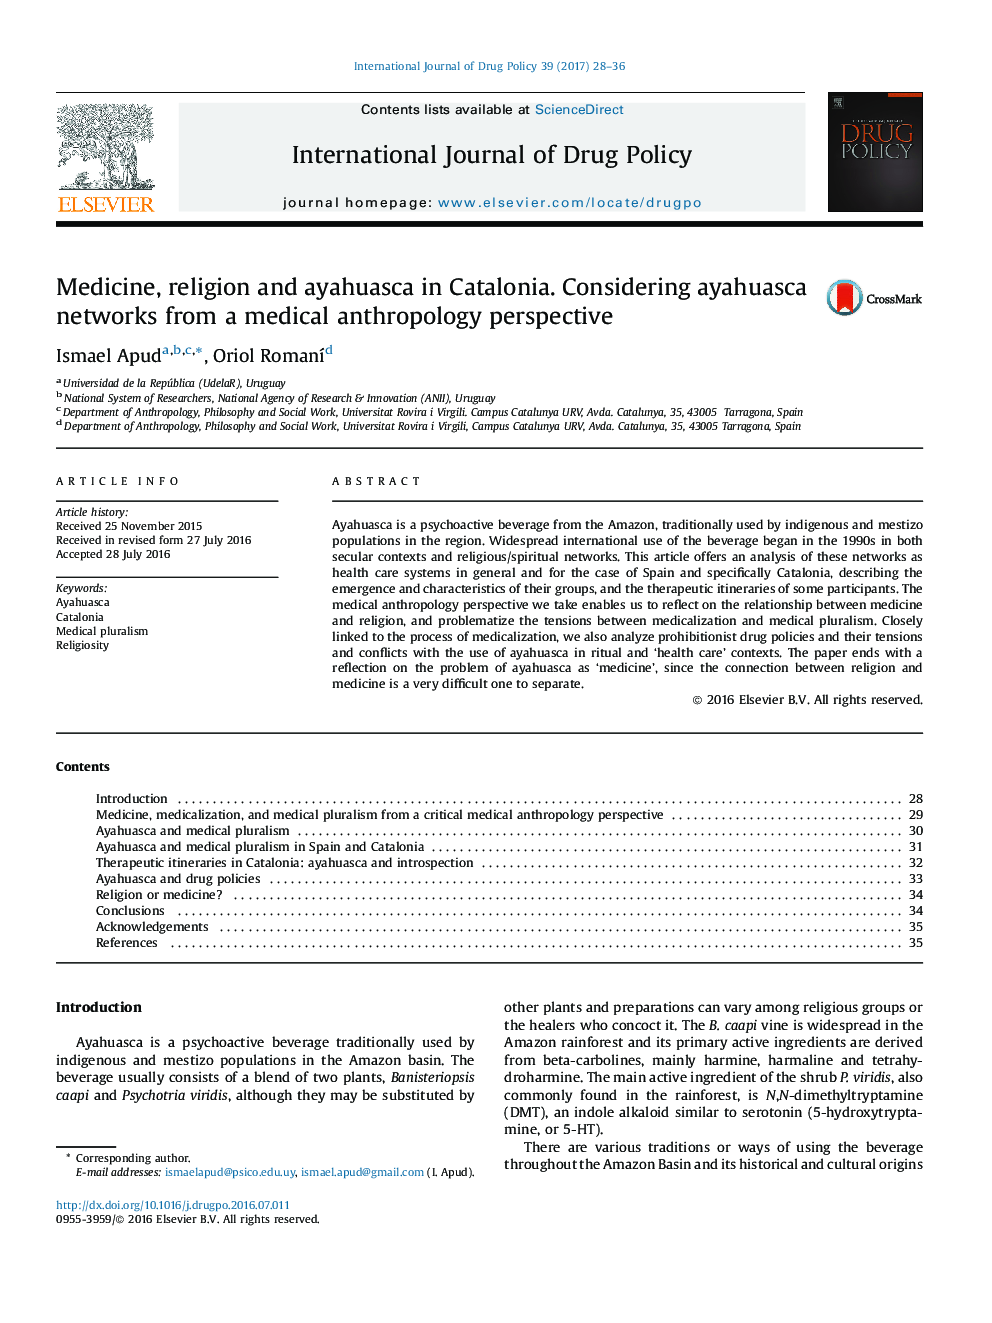 Medicine, religion and ayahuasca in Catalonia. Considering ayahuasca networks from a medical anthropology perspective